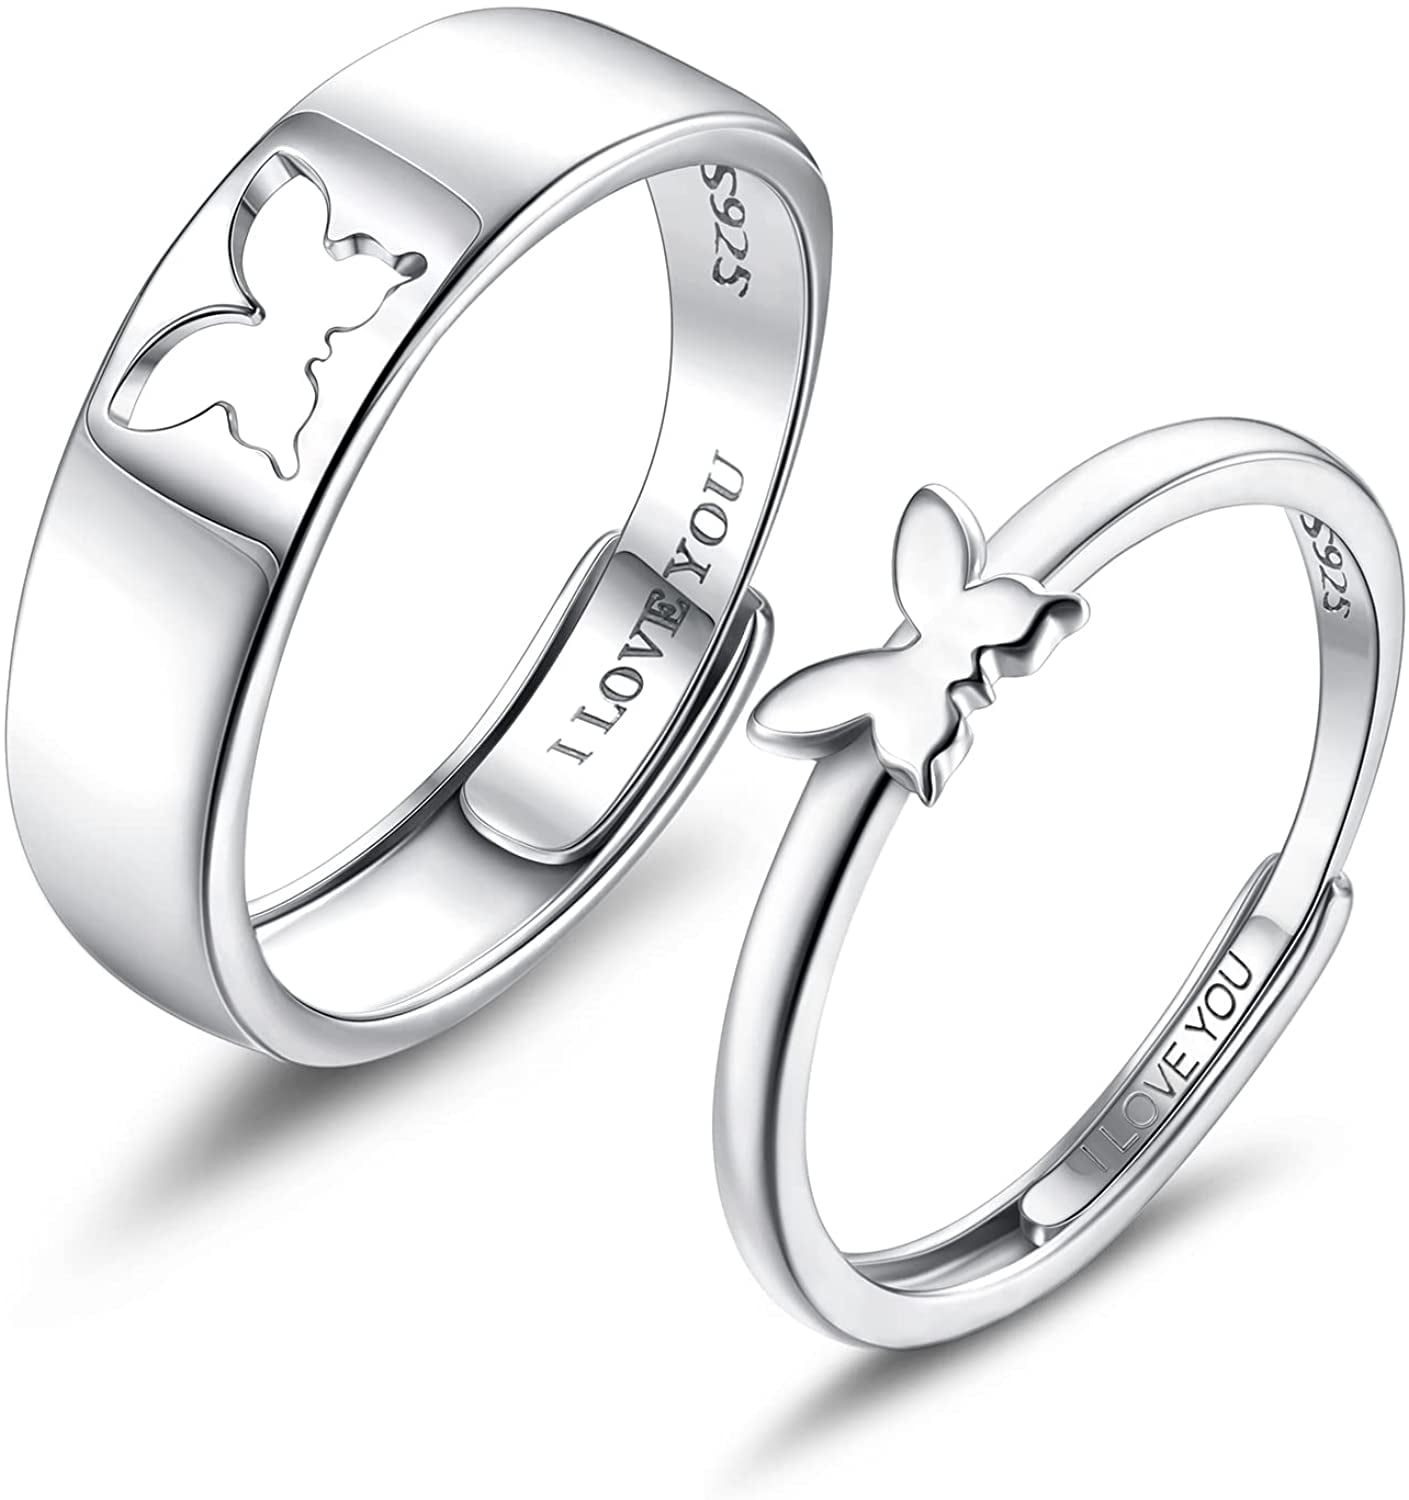 Roman numeral sterling silver ring – AlmaJewelryShop